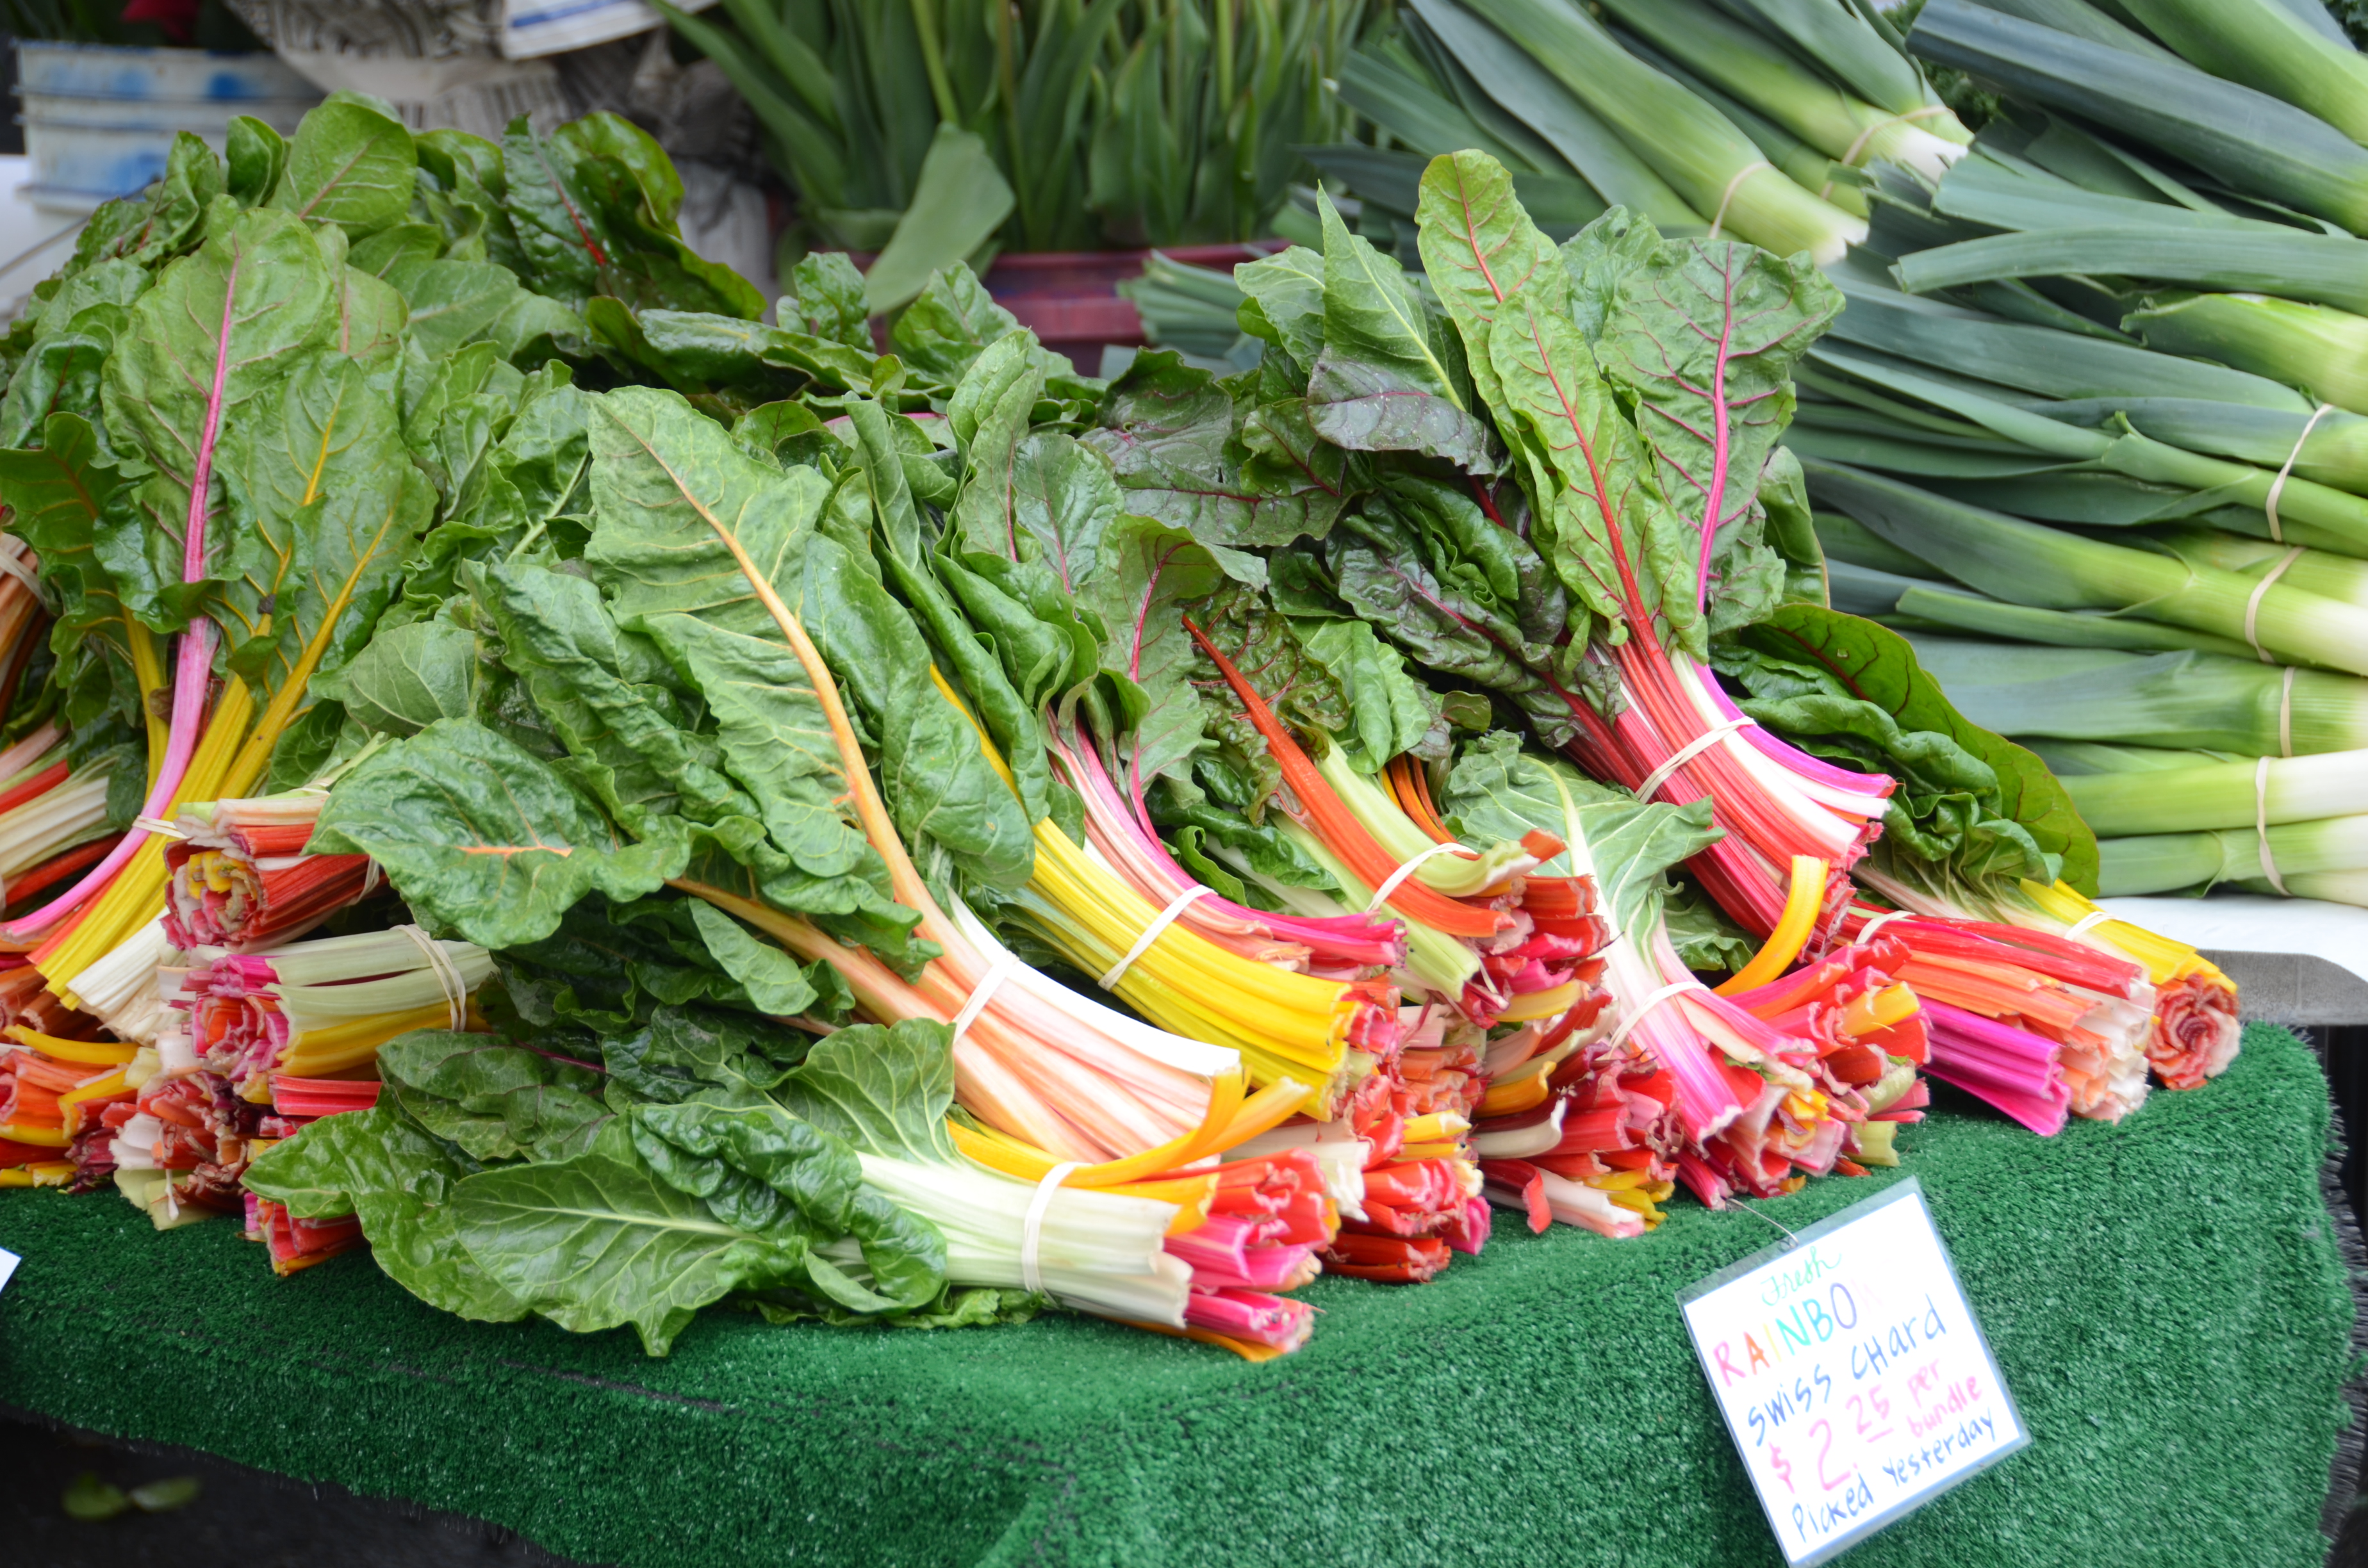 Lee's Fresh Produce is among the returning vendors at the Issaquah Farmers Market.